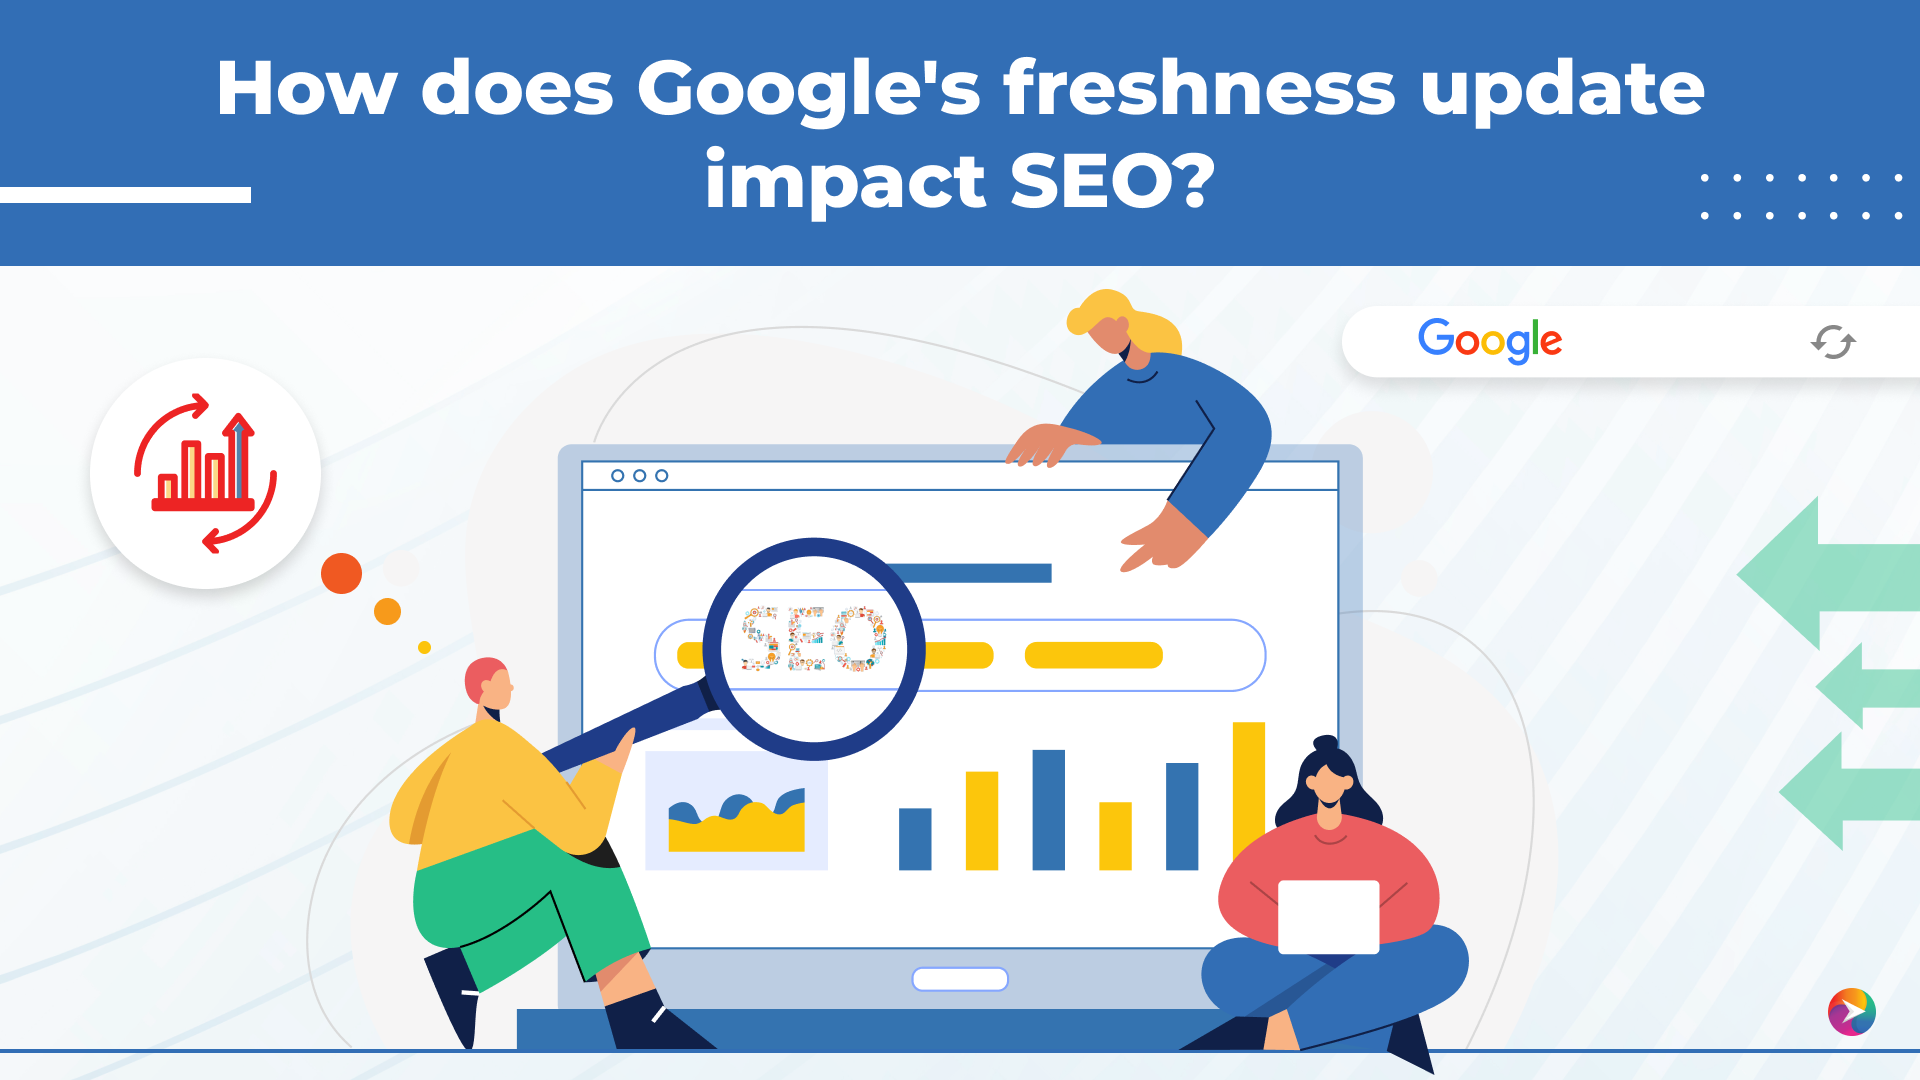 How does the Google’s freshness update impact SEO